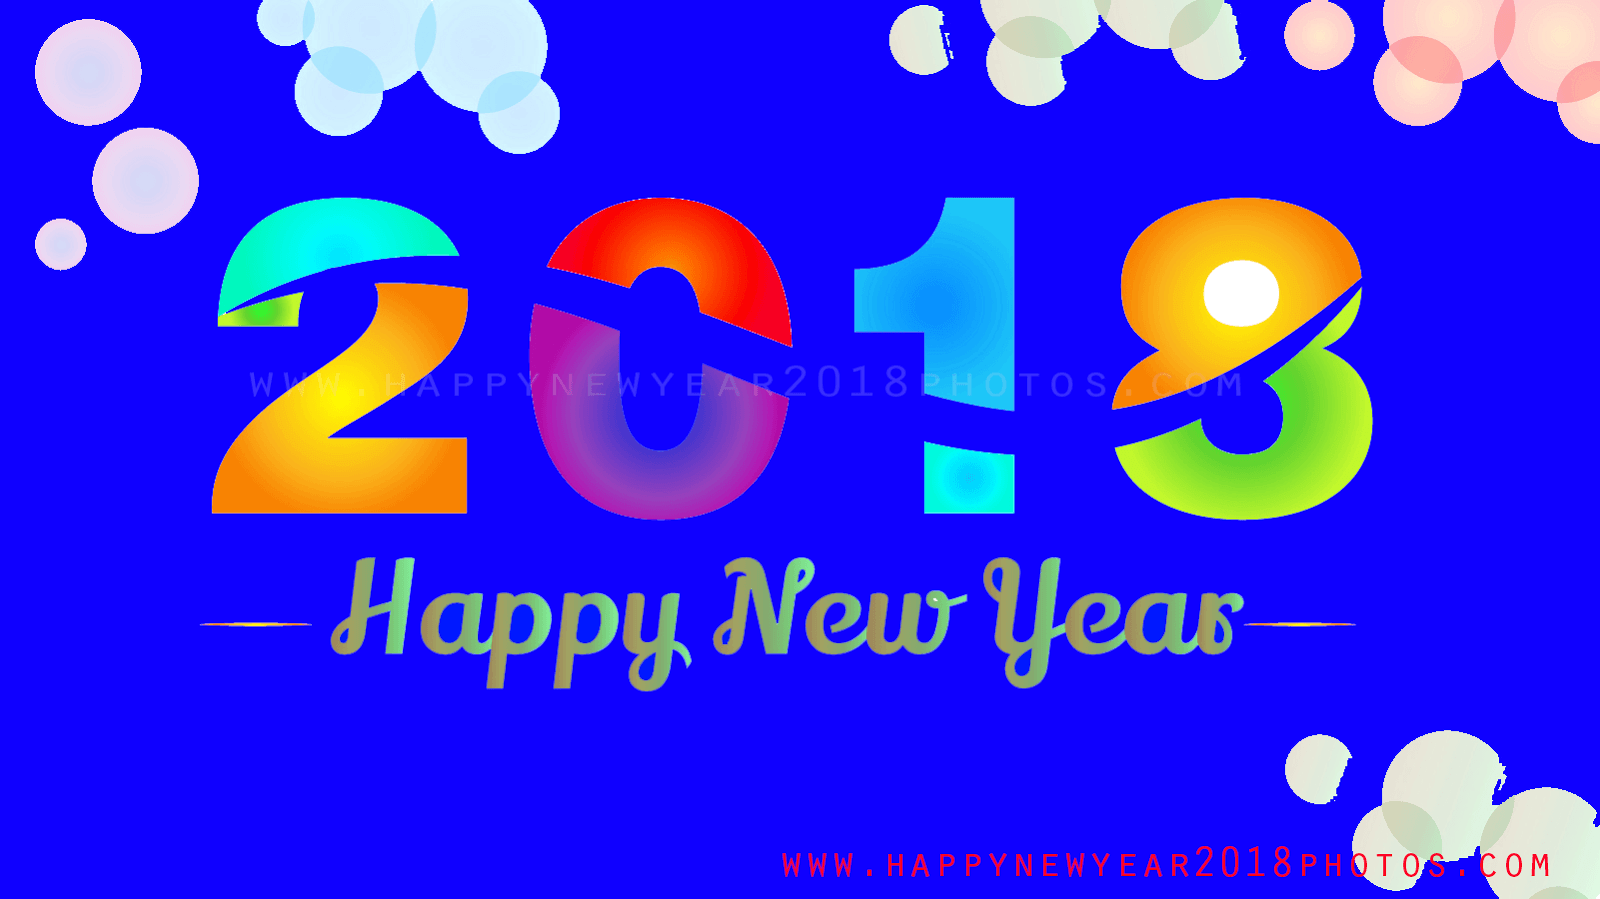 New year funny dp 2018 cartoons smileys for whatsapp facebook